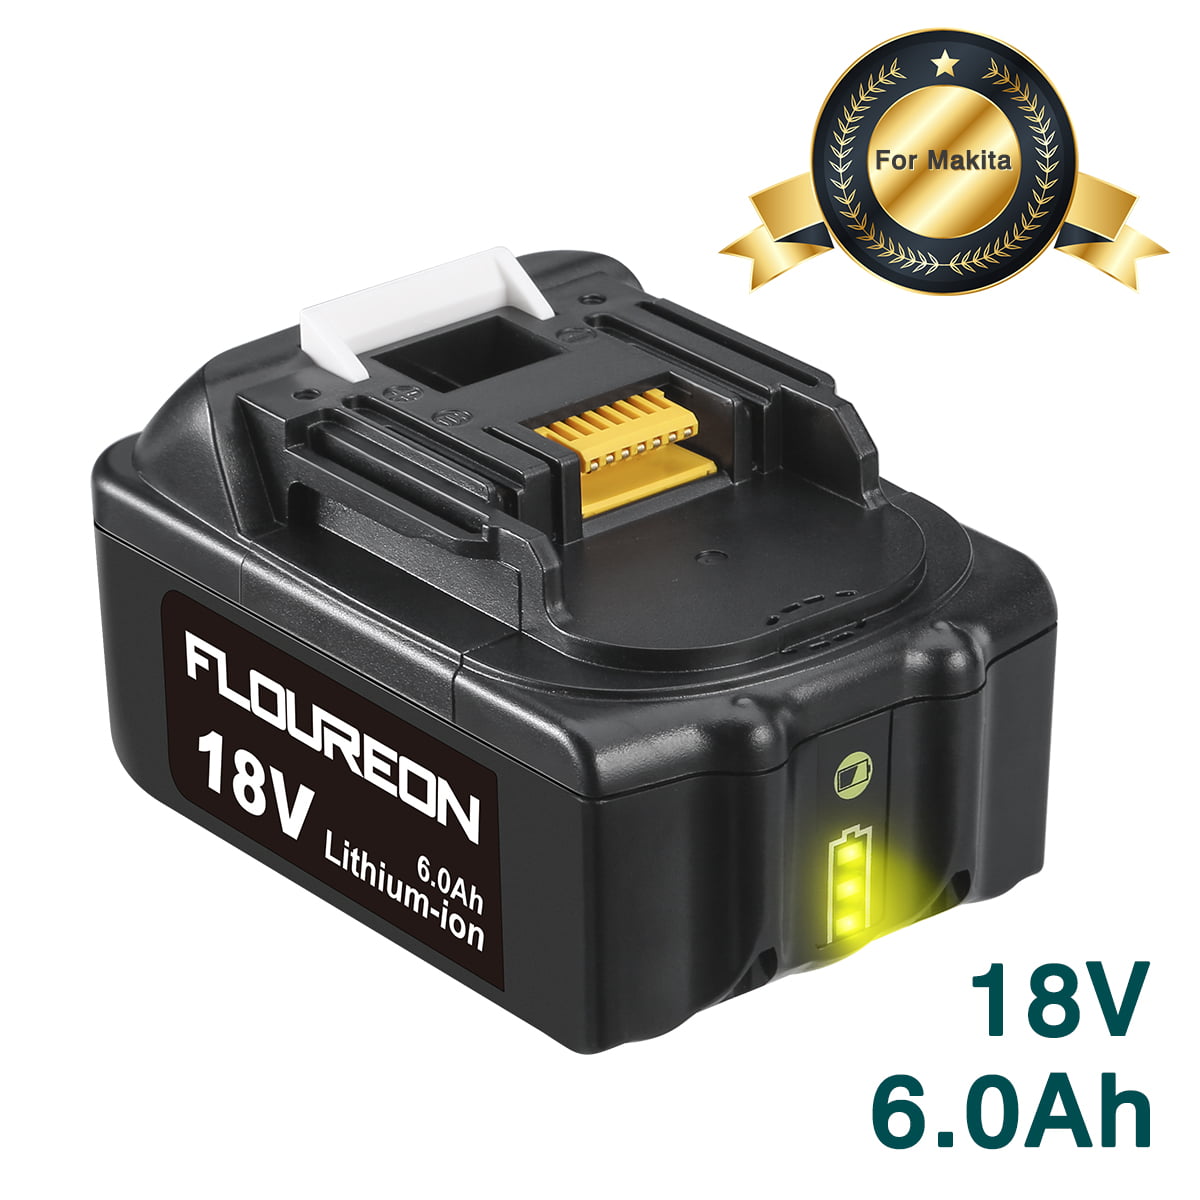 New 18V 6.0Ah Lithium ion Battery For Makita BL1860 BL1840 BL1830 BL1815 LXT400 